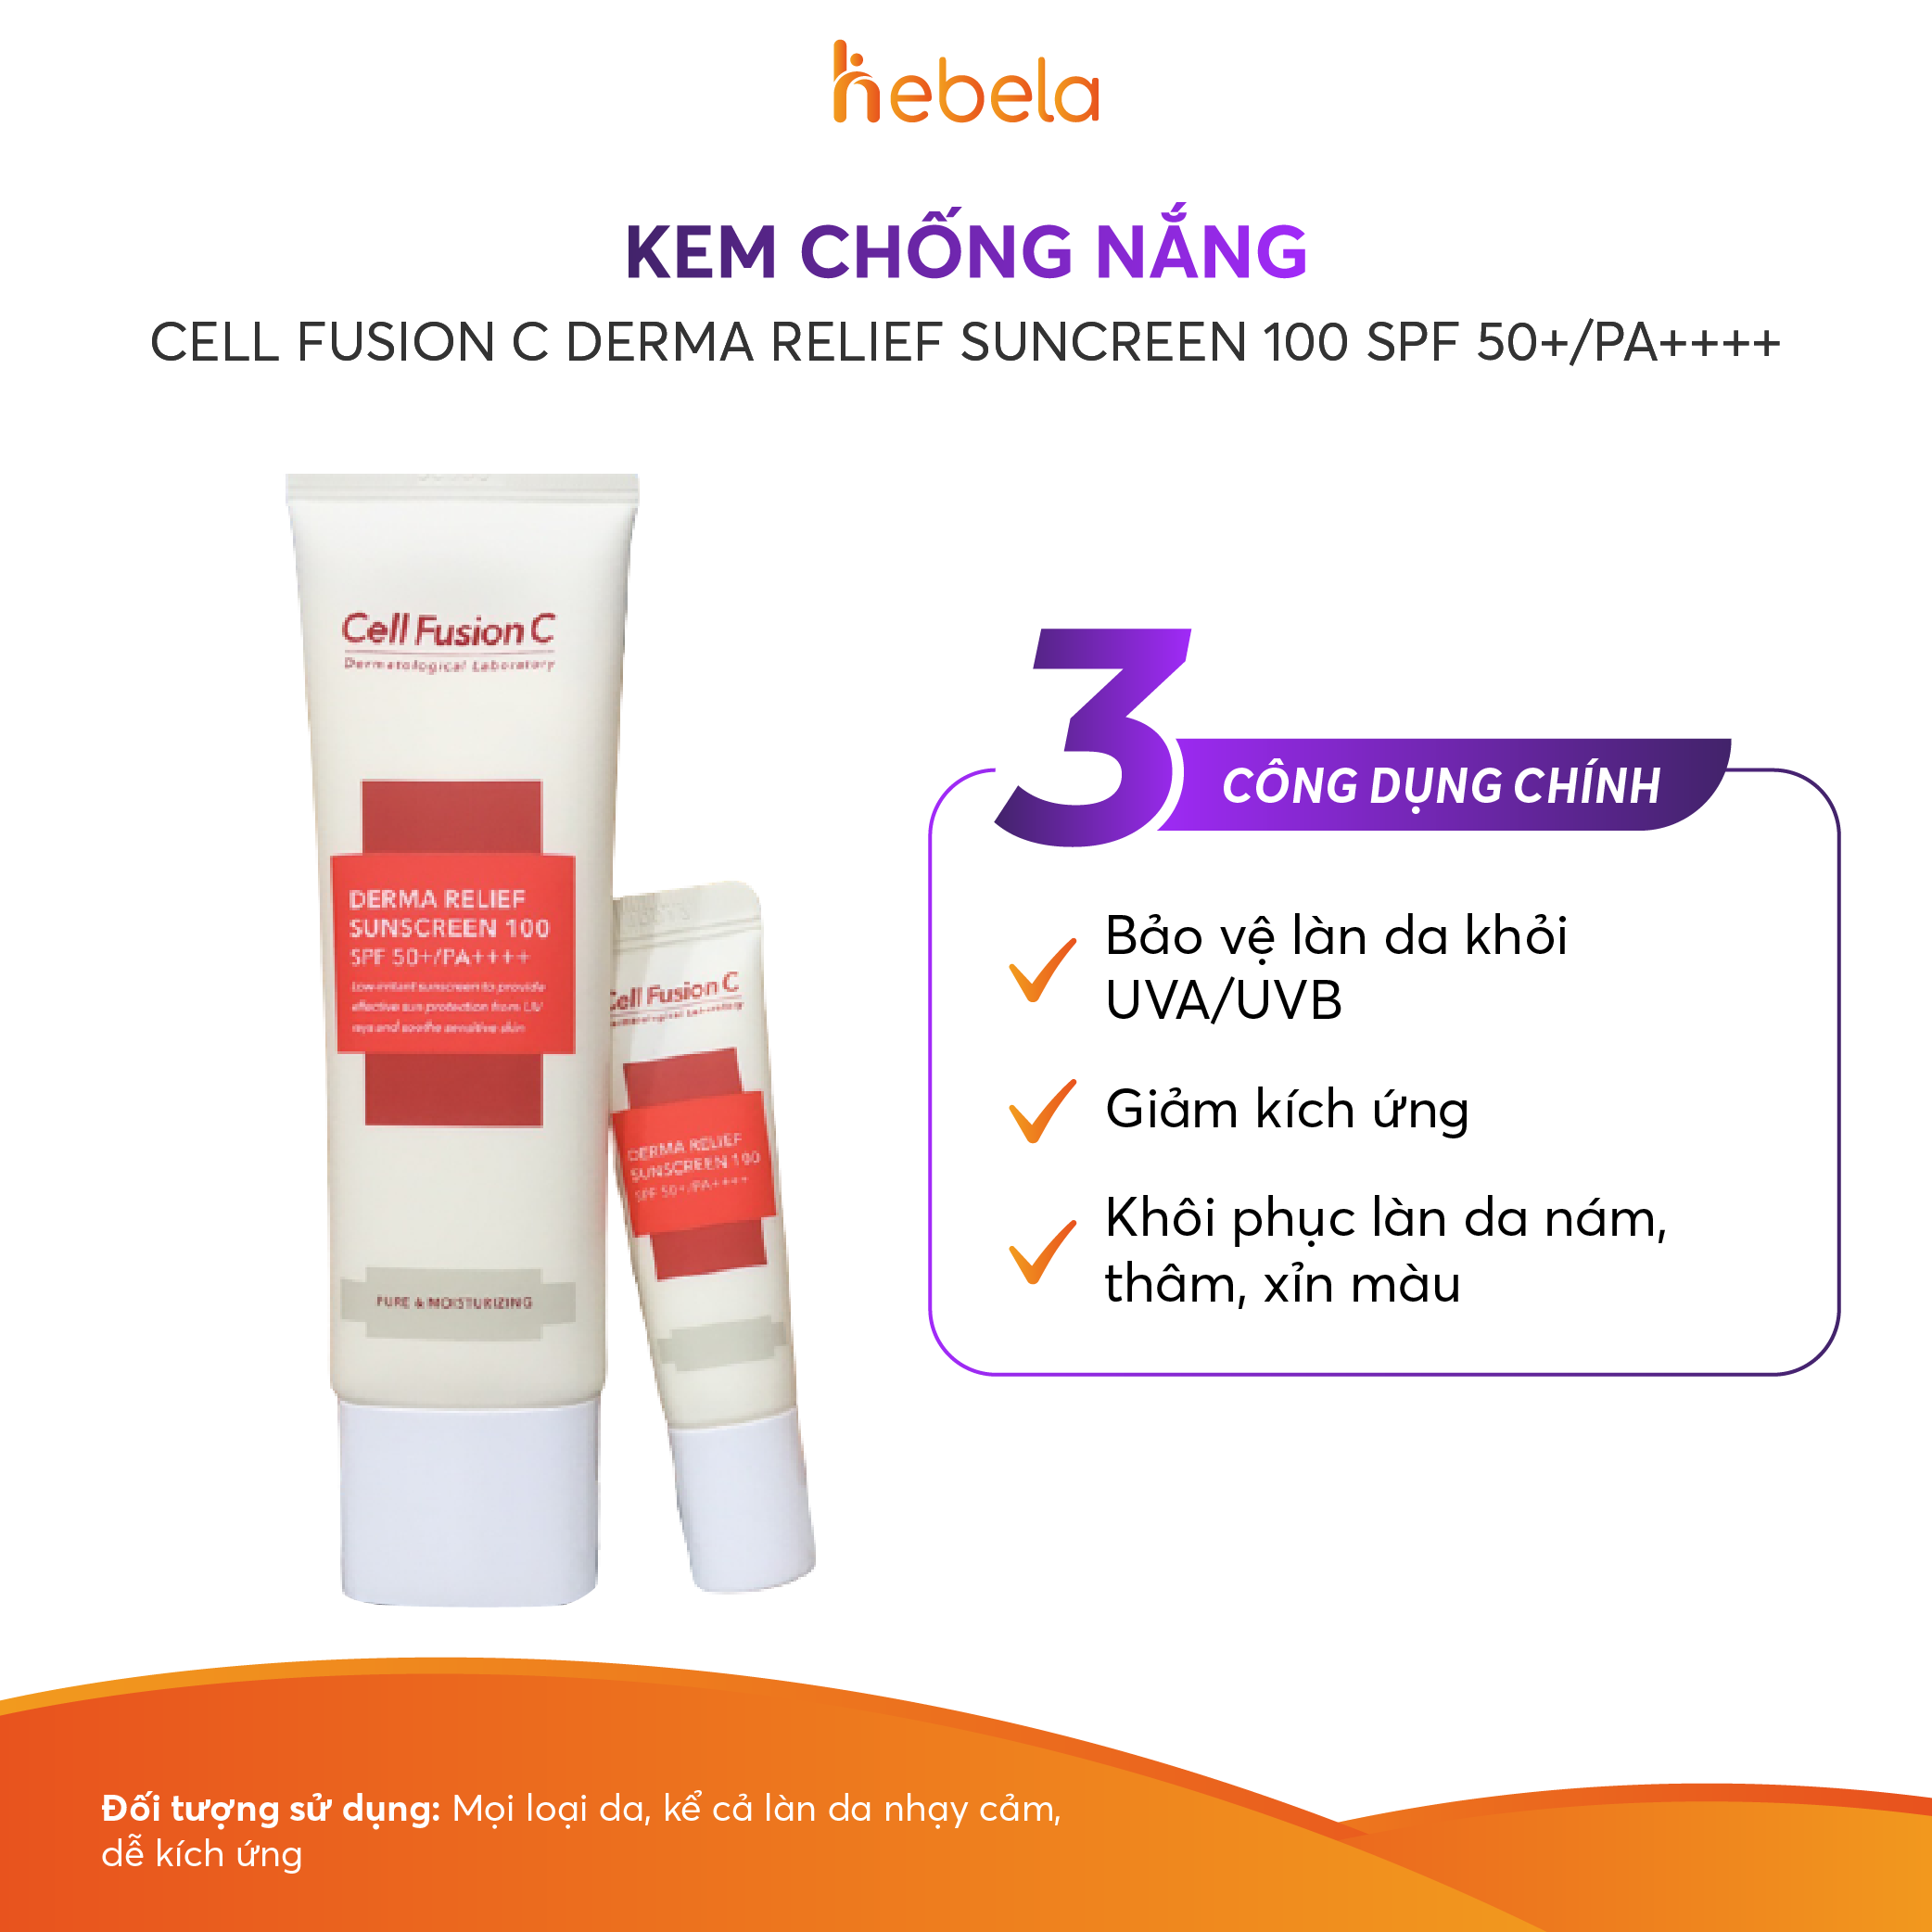 Kem chống nắng Cell Fusion C Derma Relief Suncreen 100 SPF 50+/PA++++ 